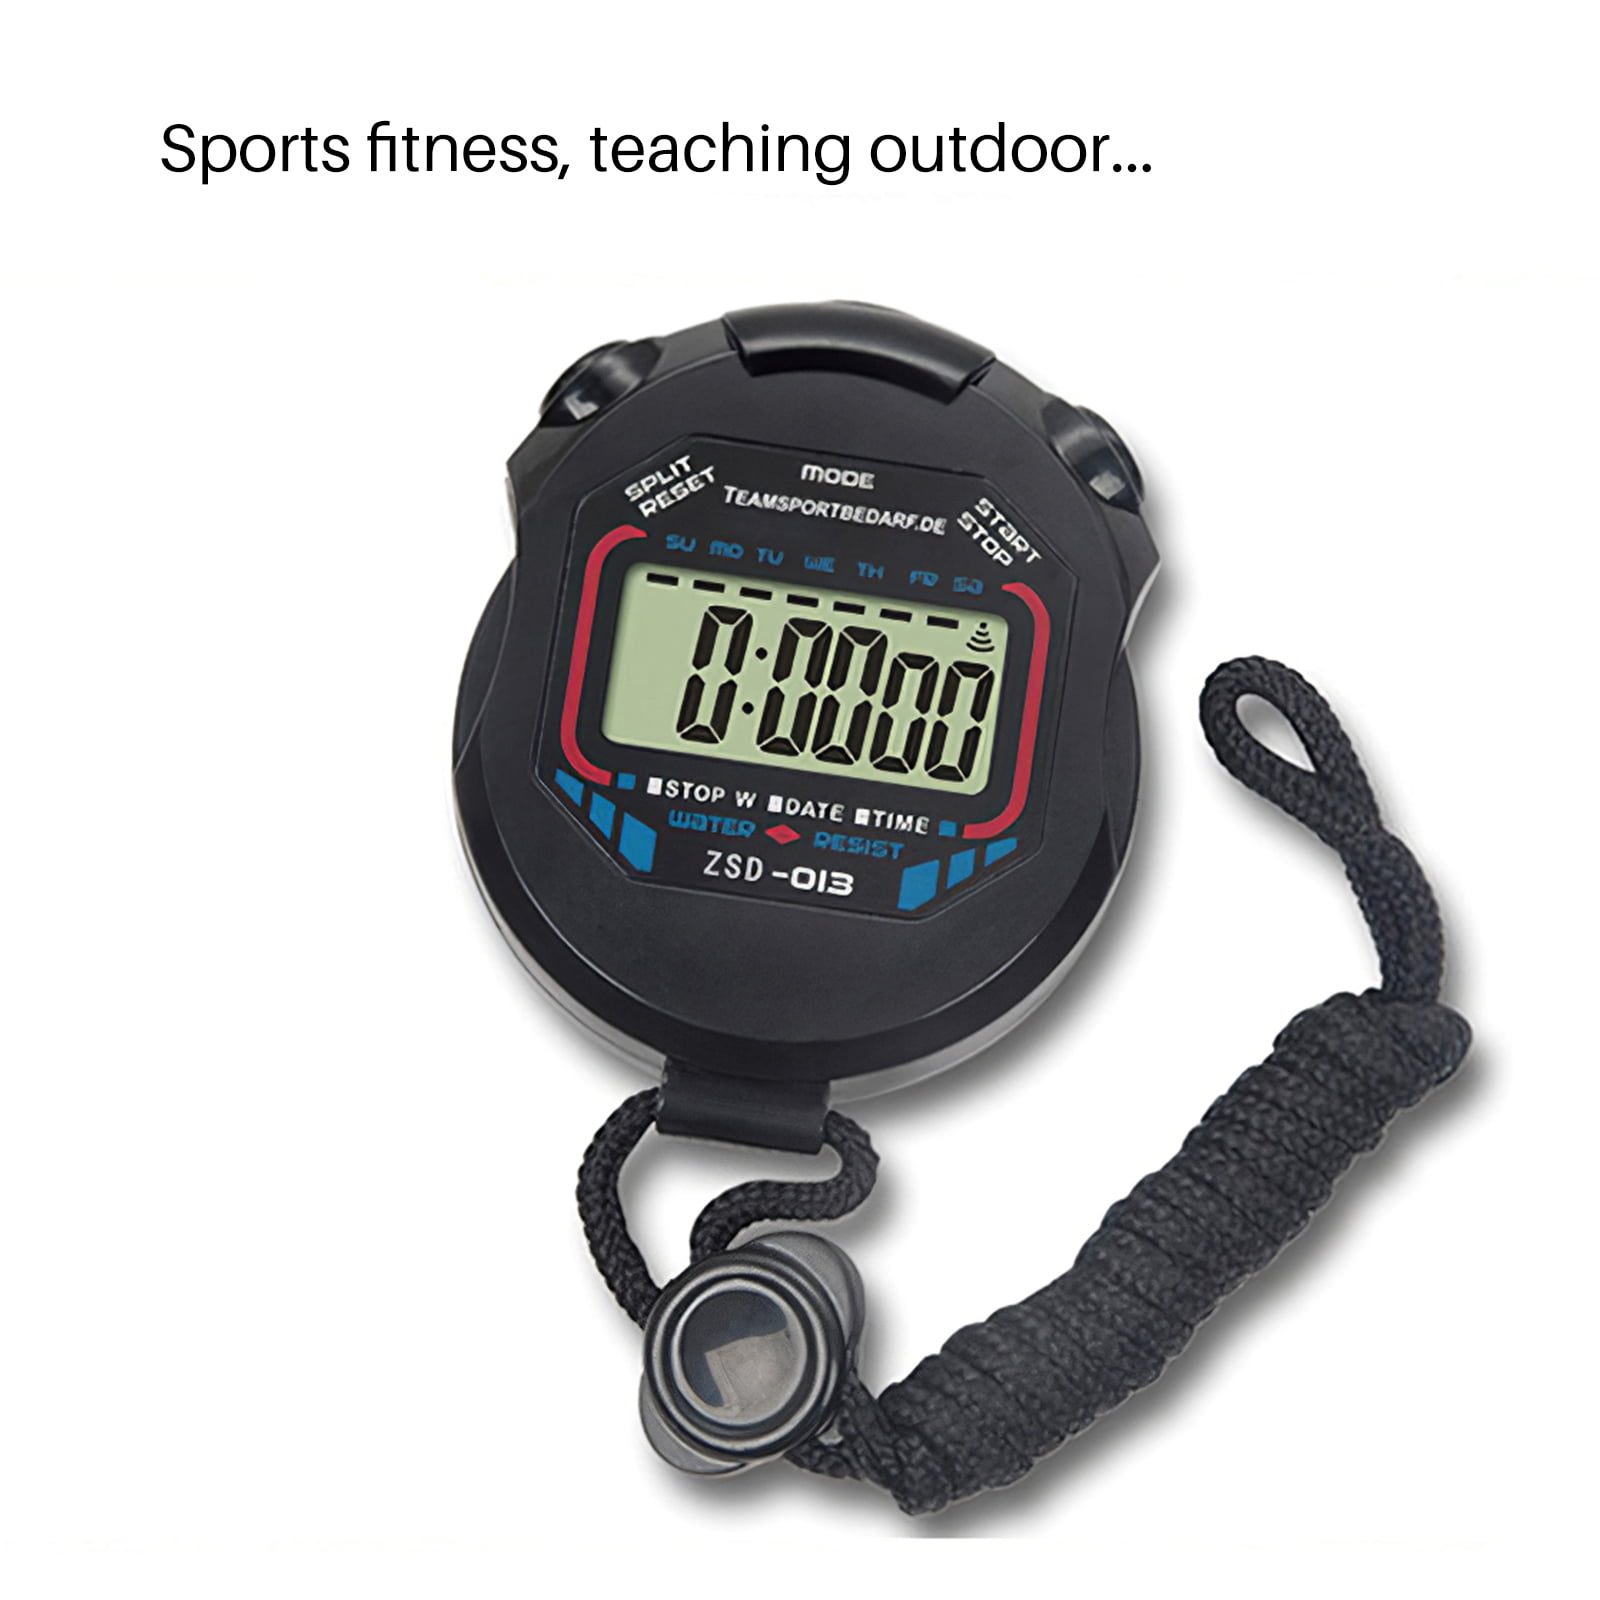 Jabroyee 2pcs ZSD-OI3 Digital,Stopwatch Waterproof Multifunctional Sports Countdown Timer Competition Stopwatch Sports and Fitness Portable 2pcs ZSD-OI3 Digital Other Indoor Sports Accessories 